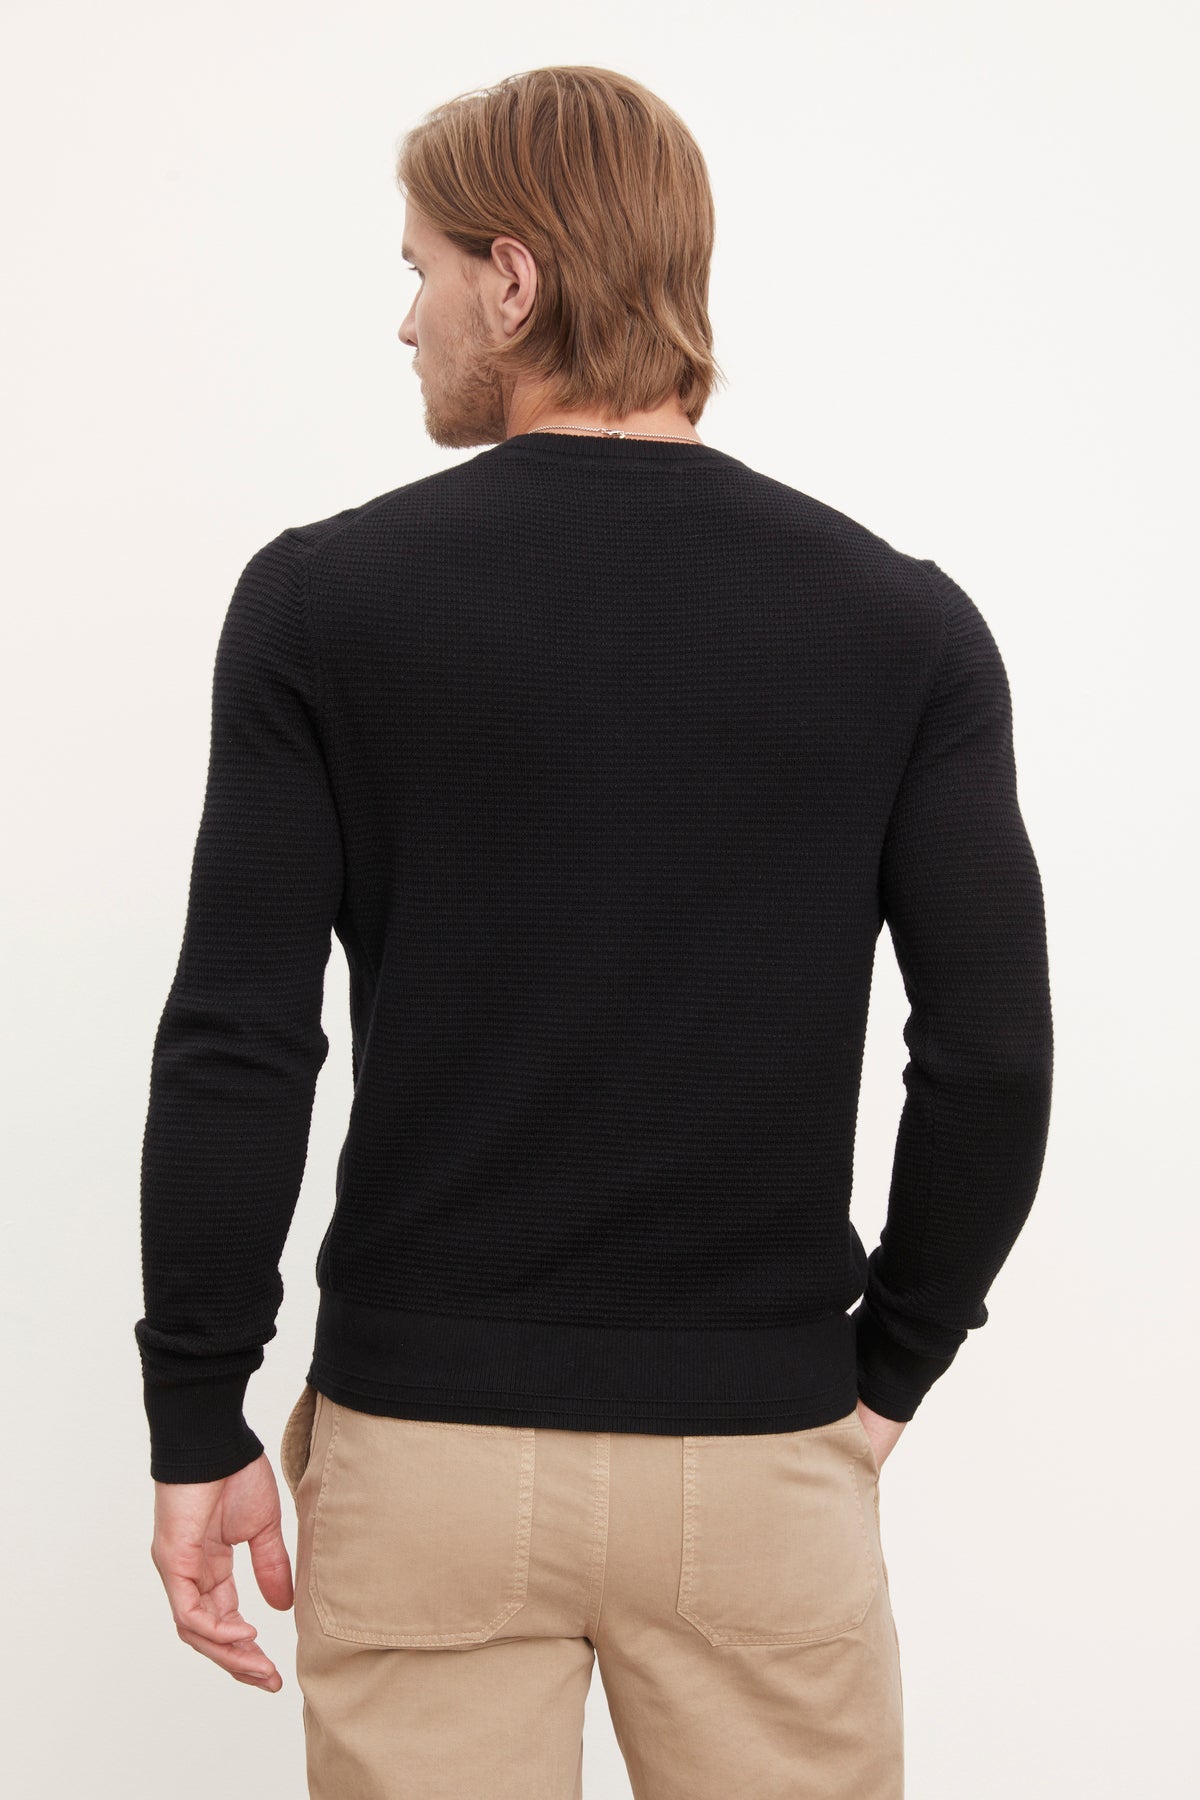 The back view of a man wearing a Velvet by Graham & Spencer ACE THERMAL CREW black sweater and khaki pants.-36008998535361